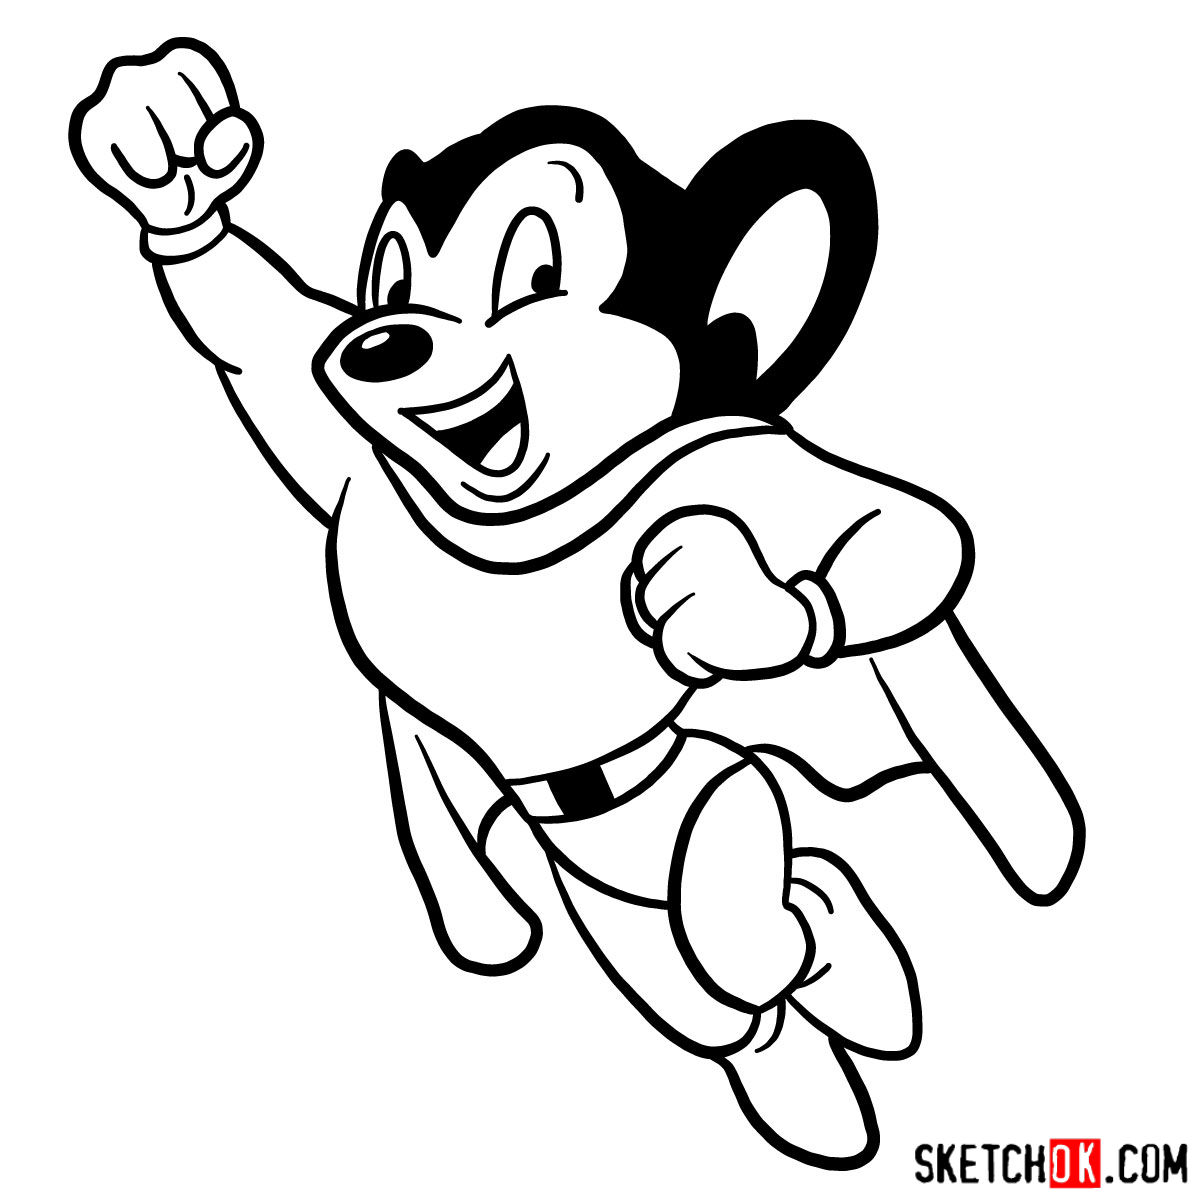 How to draw Mighty Mouse - Sketchok easy drawing guides